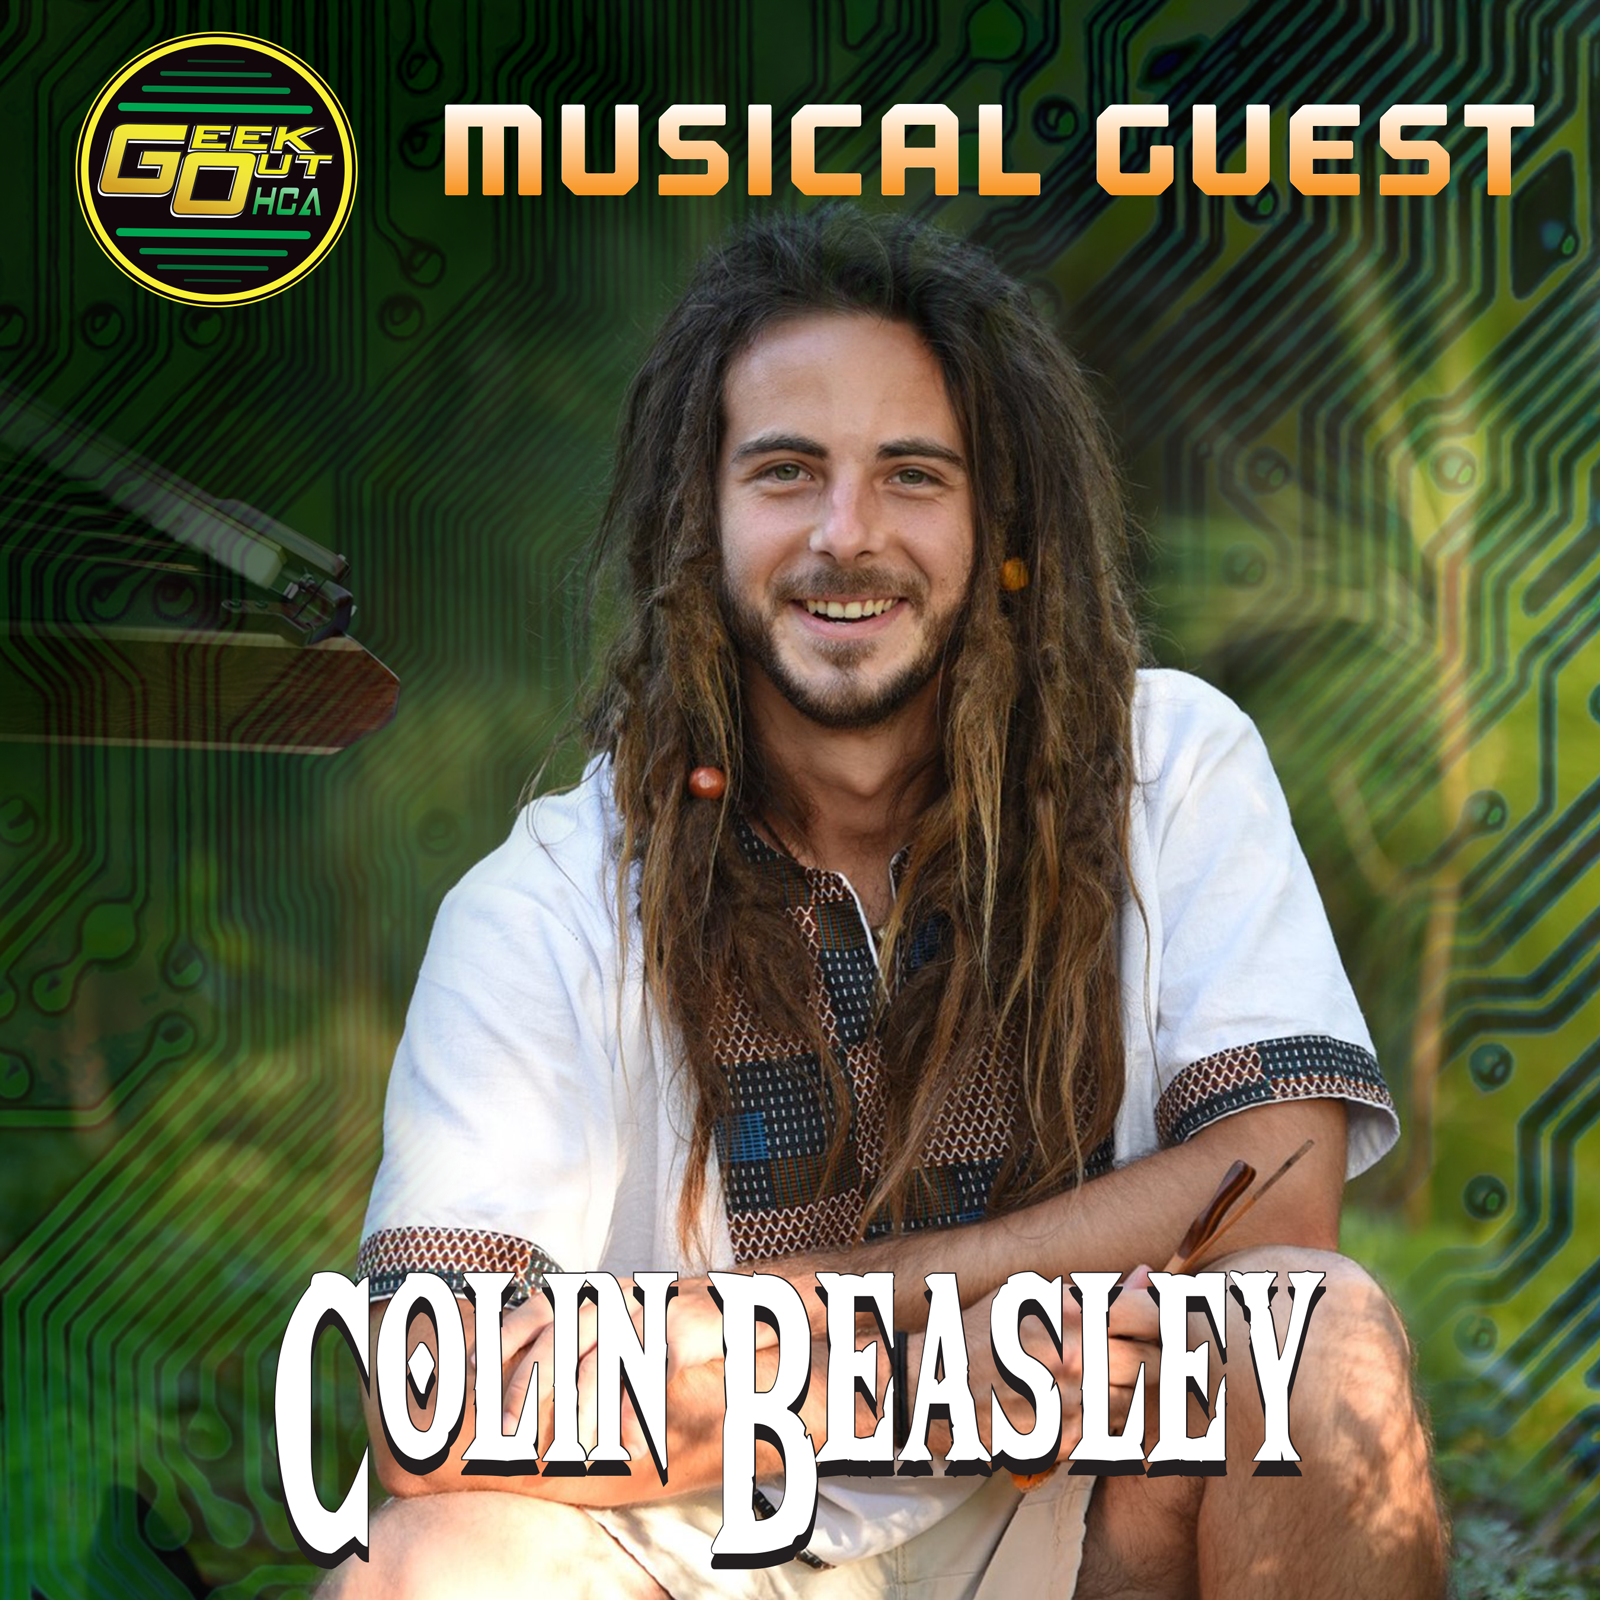   Colin Beasley is a multi-instrumentalist specializing in hammered dulcimer. Known for his unique style on the instrument, Colin plays a plethora of musical genres including jazz, latin, pop, folk, and of course, video game music. He actually won hi